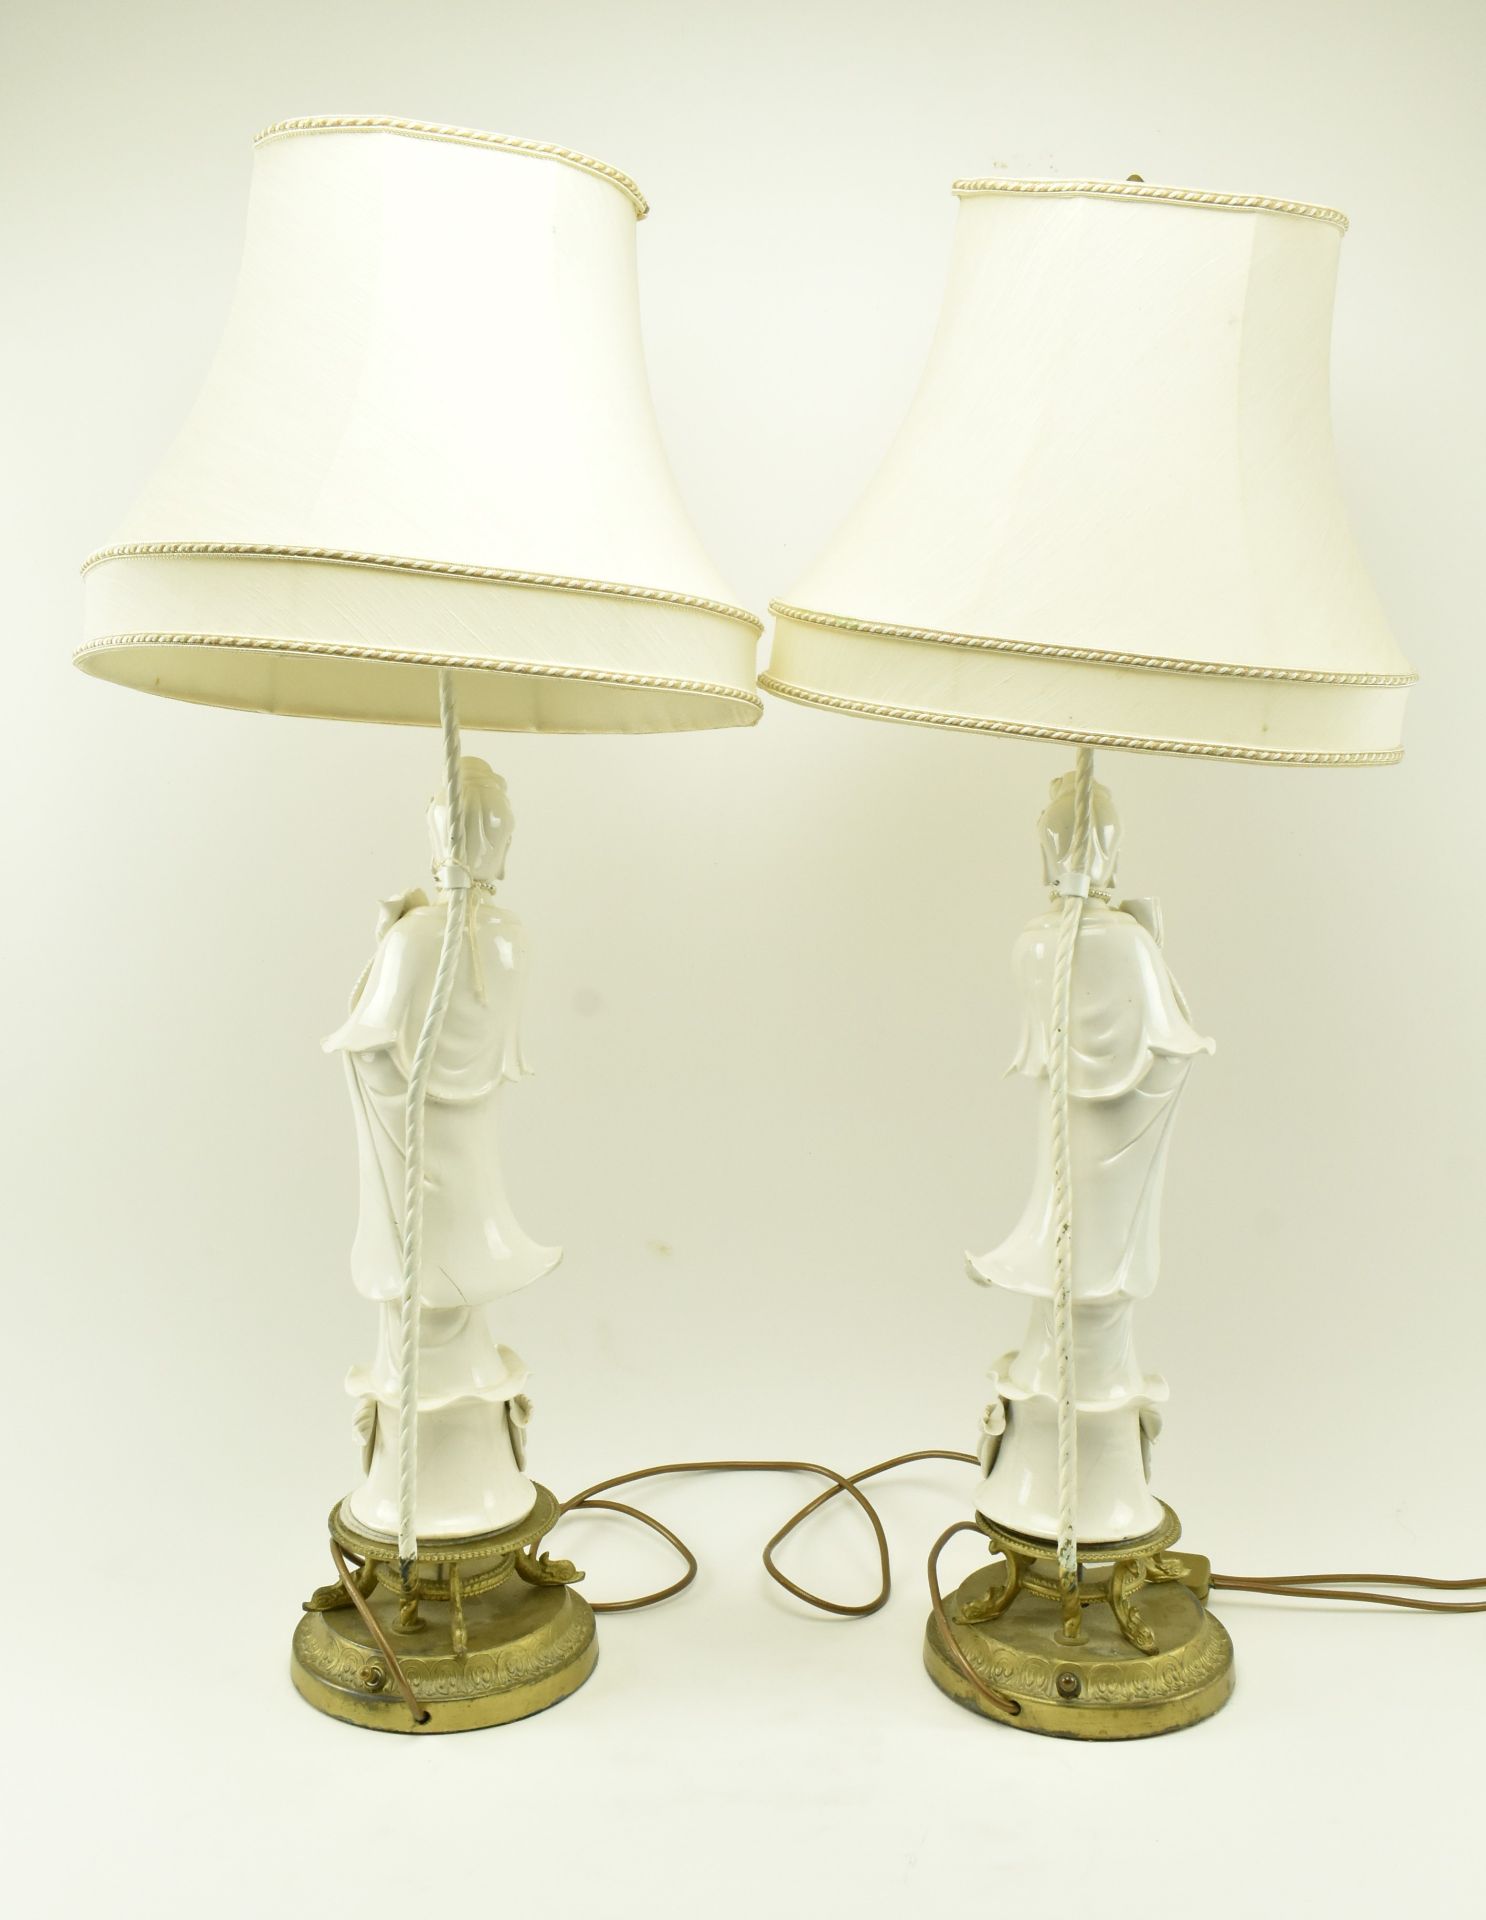 PAIR OF CHINESE REPUBLIC PERIOD BLANC DE CHINE GUANYIN LAMPS - Image 8 of 9